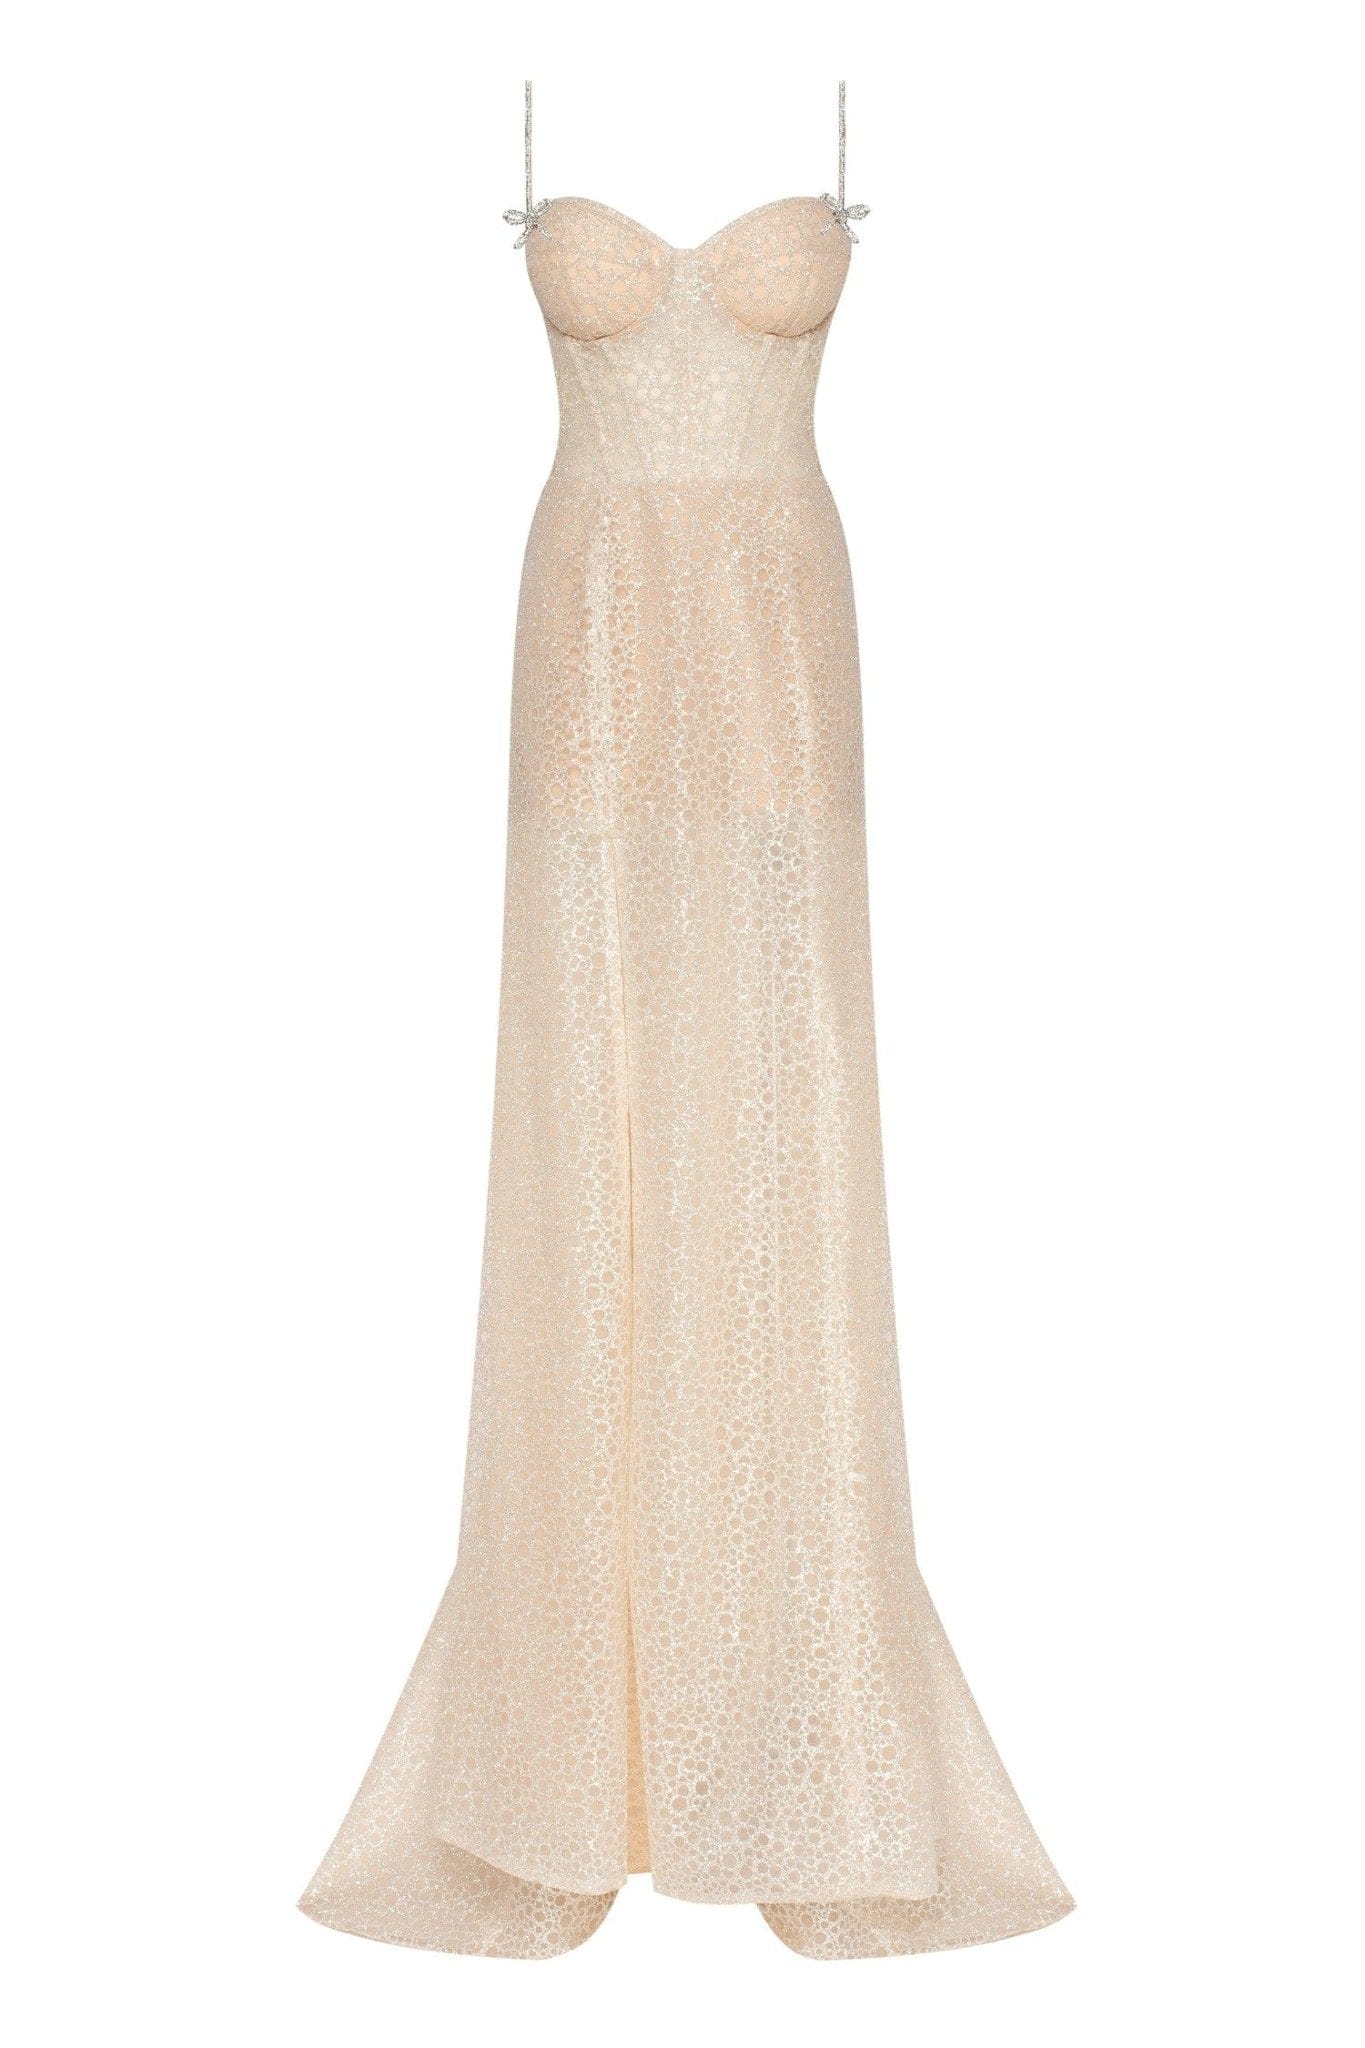 Golden Royal fitted evening gown with the high slit - Milla